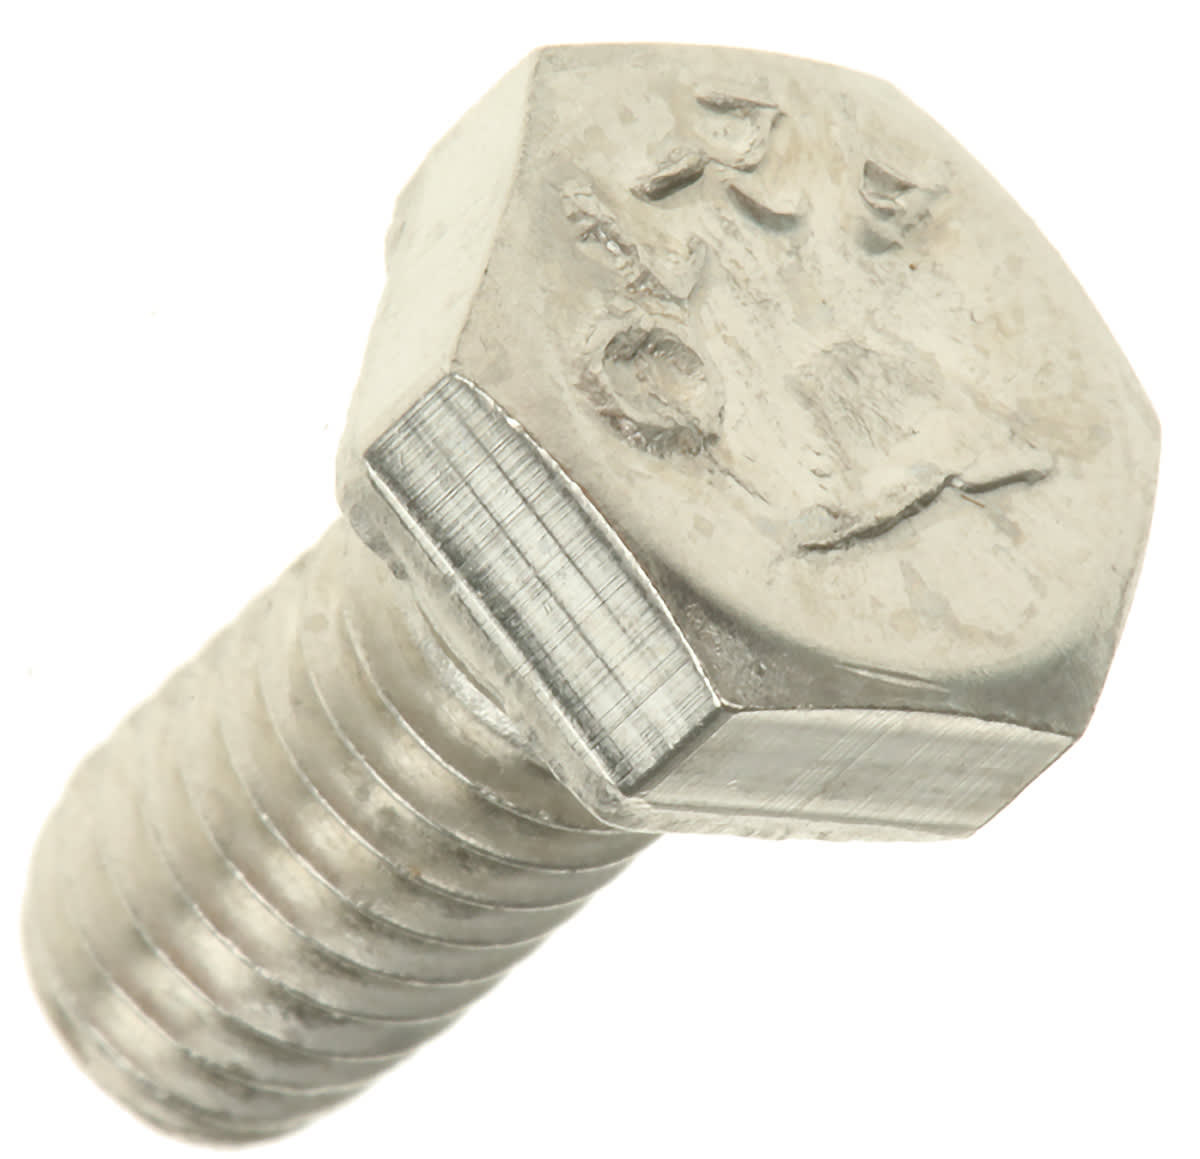 What are Machine Screws Made Of?